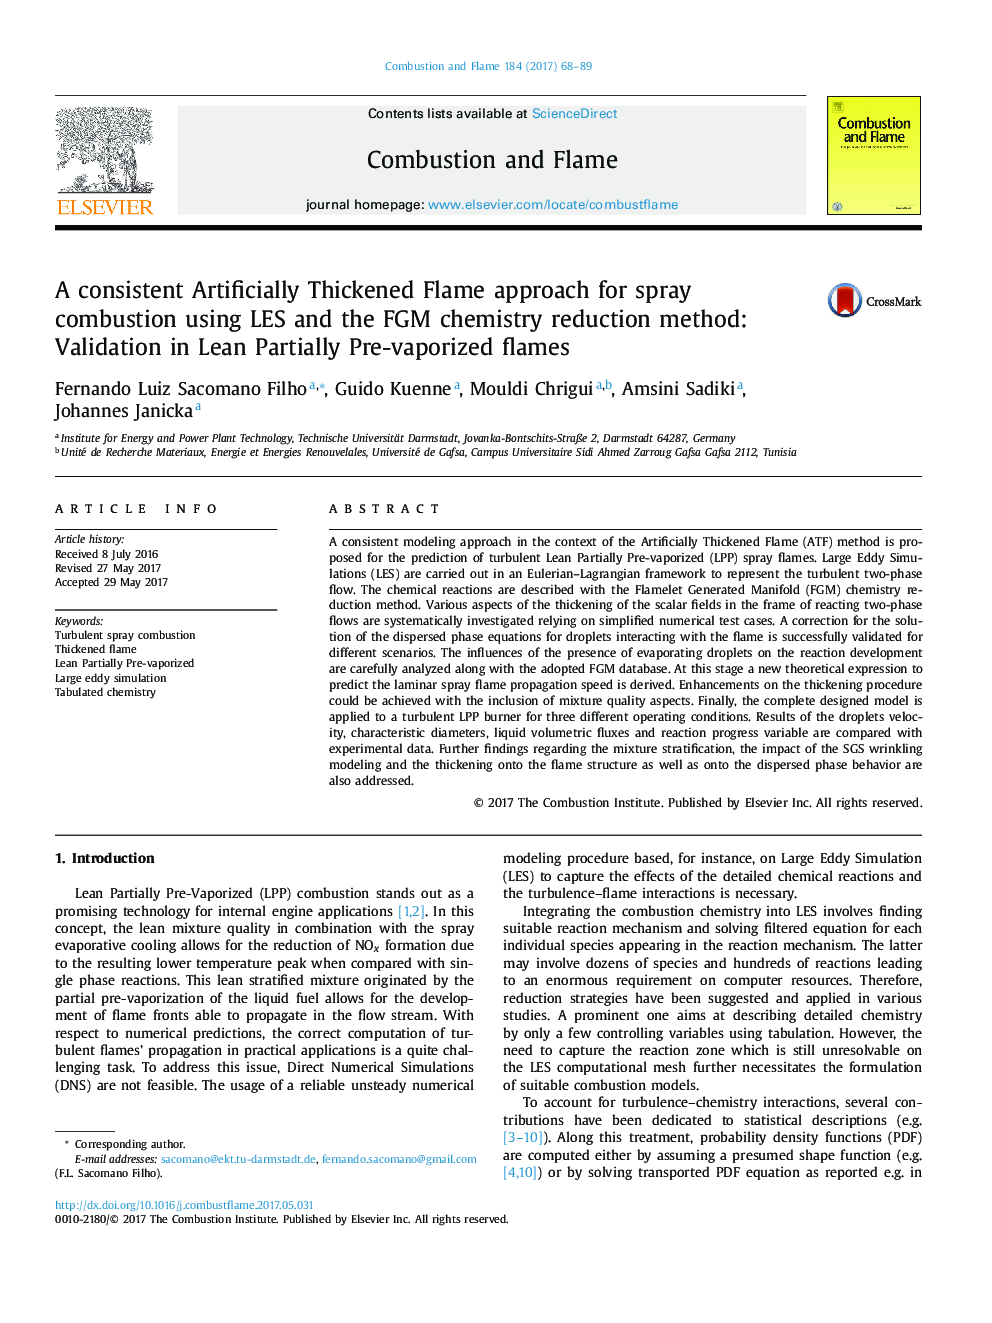 A consistent Artificially Thickened Flame approach for spray combustion using LES and the FGM chemistry reduction method: Validation in Lean Partially Pre-vaporized flames